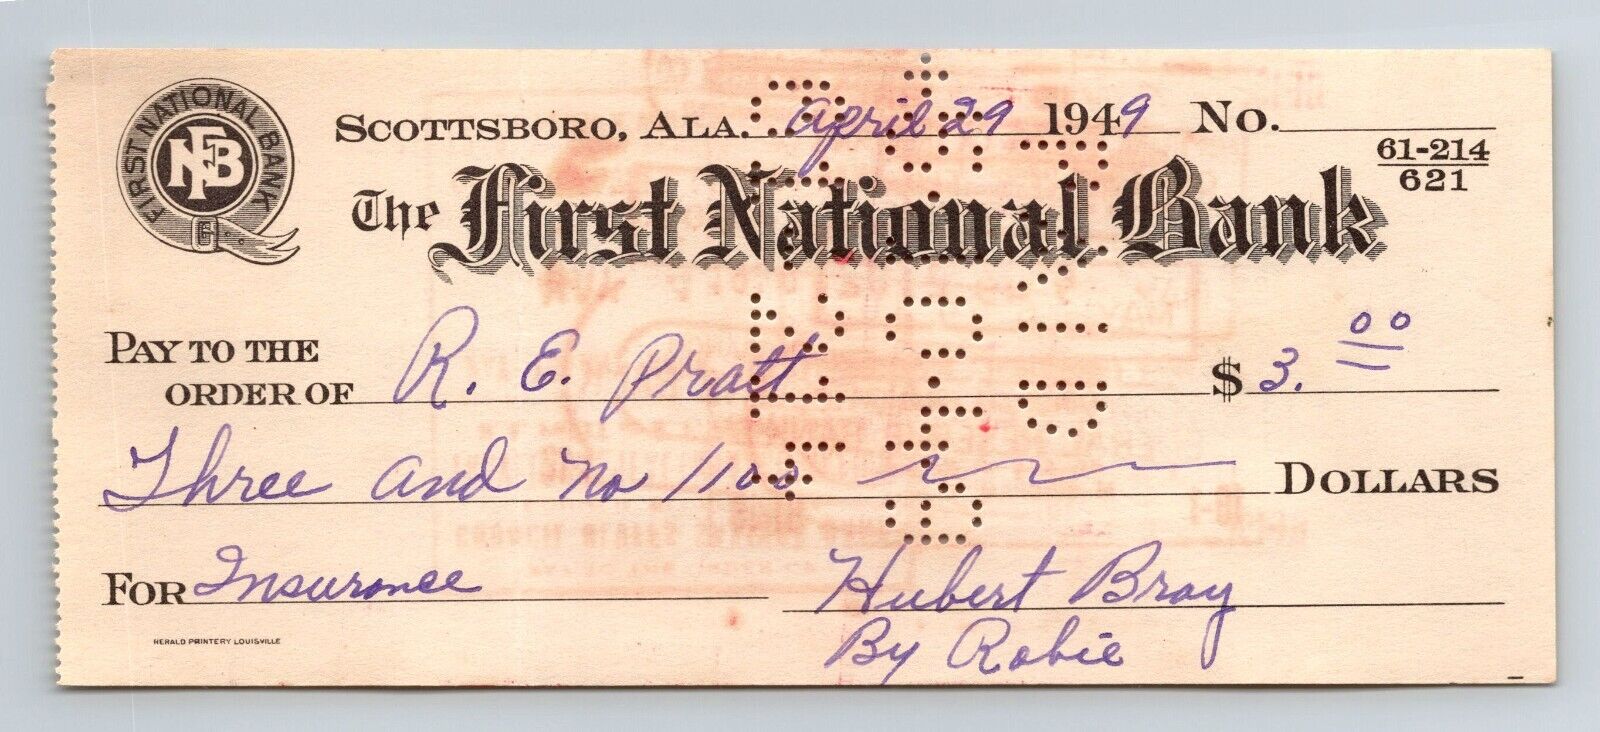 Vintage 1949 cancelled check THE FIRST NATIONAL BANK, Scottsboro,  Alabama